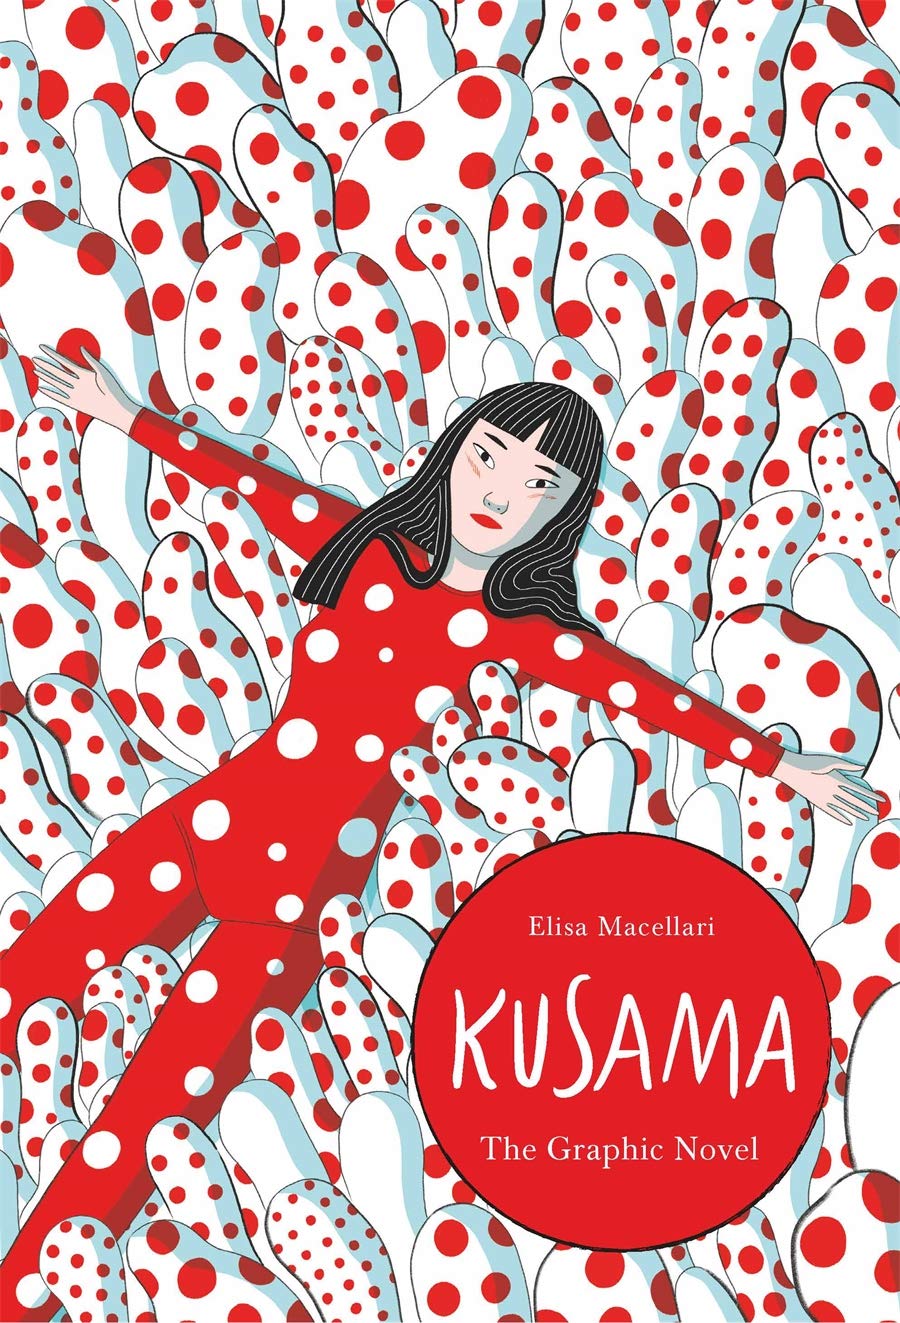 Is that Yayoi Kusama in the window?! Nope, it's actually a life-like r